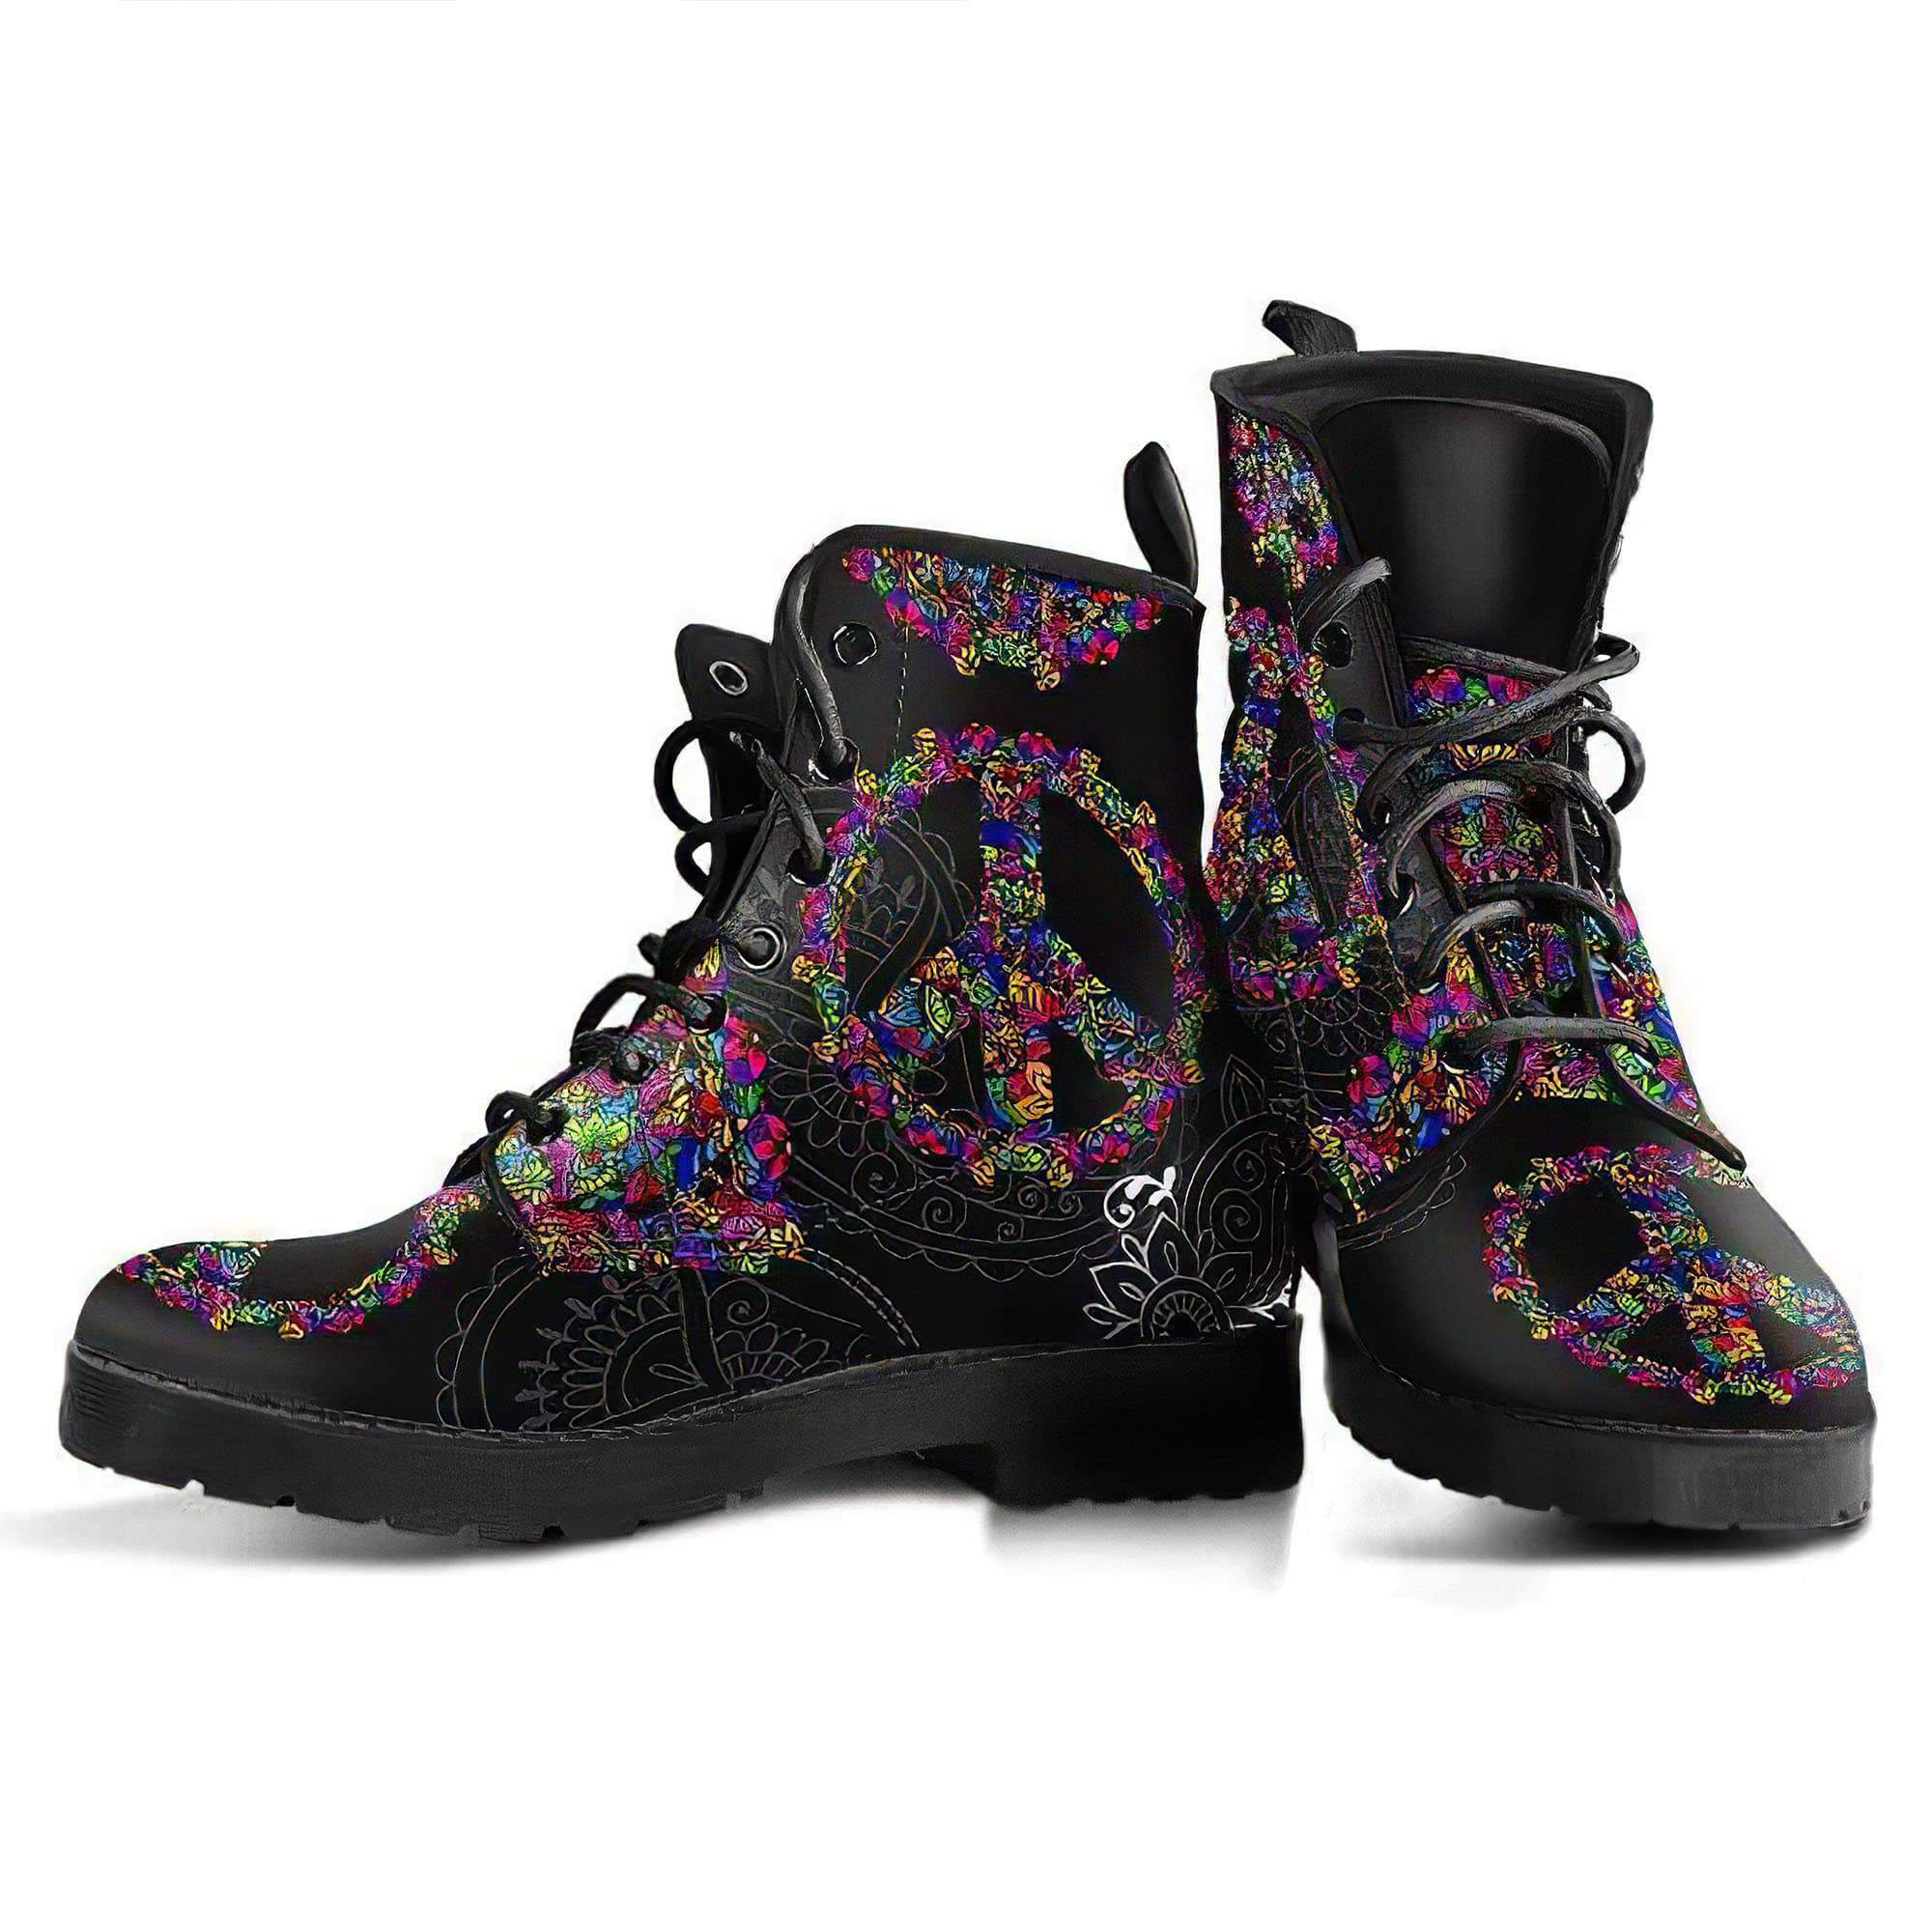 peace-v5-women-s-boots-vegan-friendly-leather-women-s-leather-boots-12051930087485.jpg